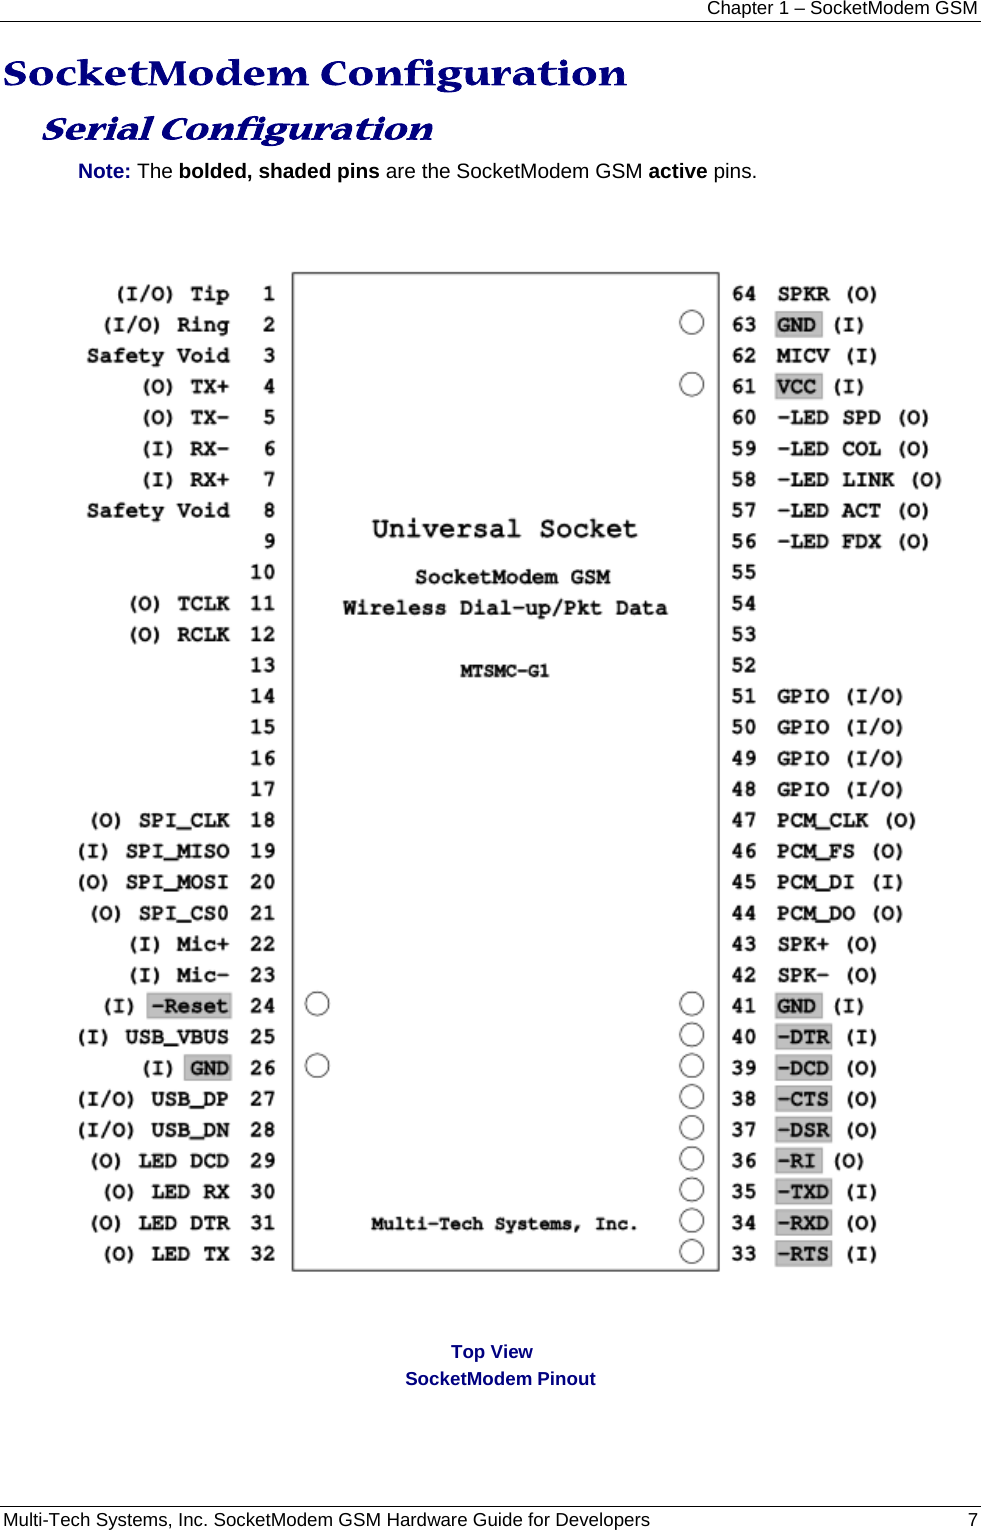 Chapter 1 – SocketModem GSM Multi-Tech Systems, Inc. SocketModem GSM Hardware Guide for Developers   7  SocketModem Configuration  Serial Configuration Note: The bolded, shaded pins are the SocketModem GSM active pins.                 Top View                 SocketModem Pinout 